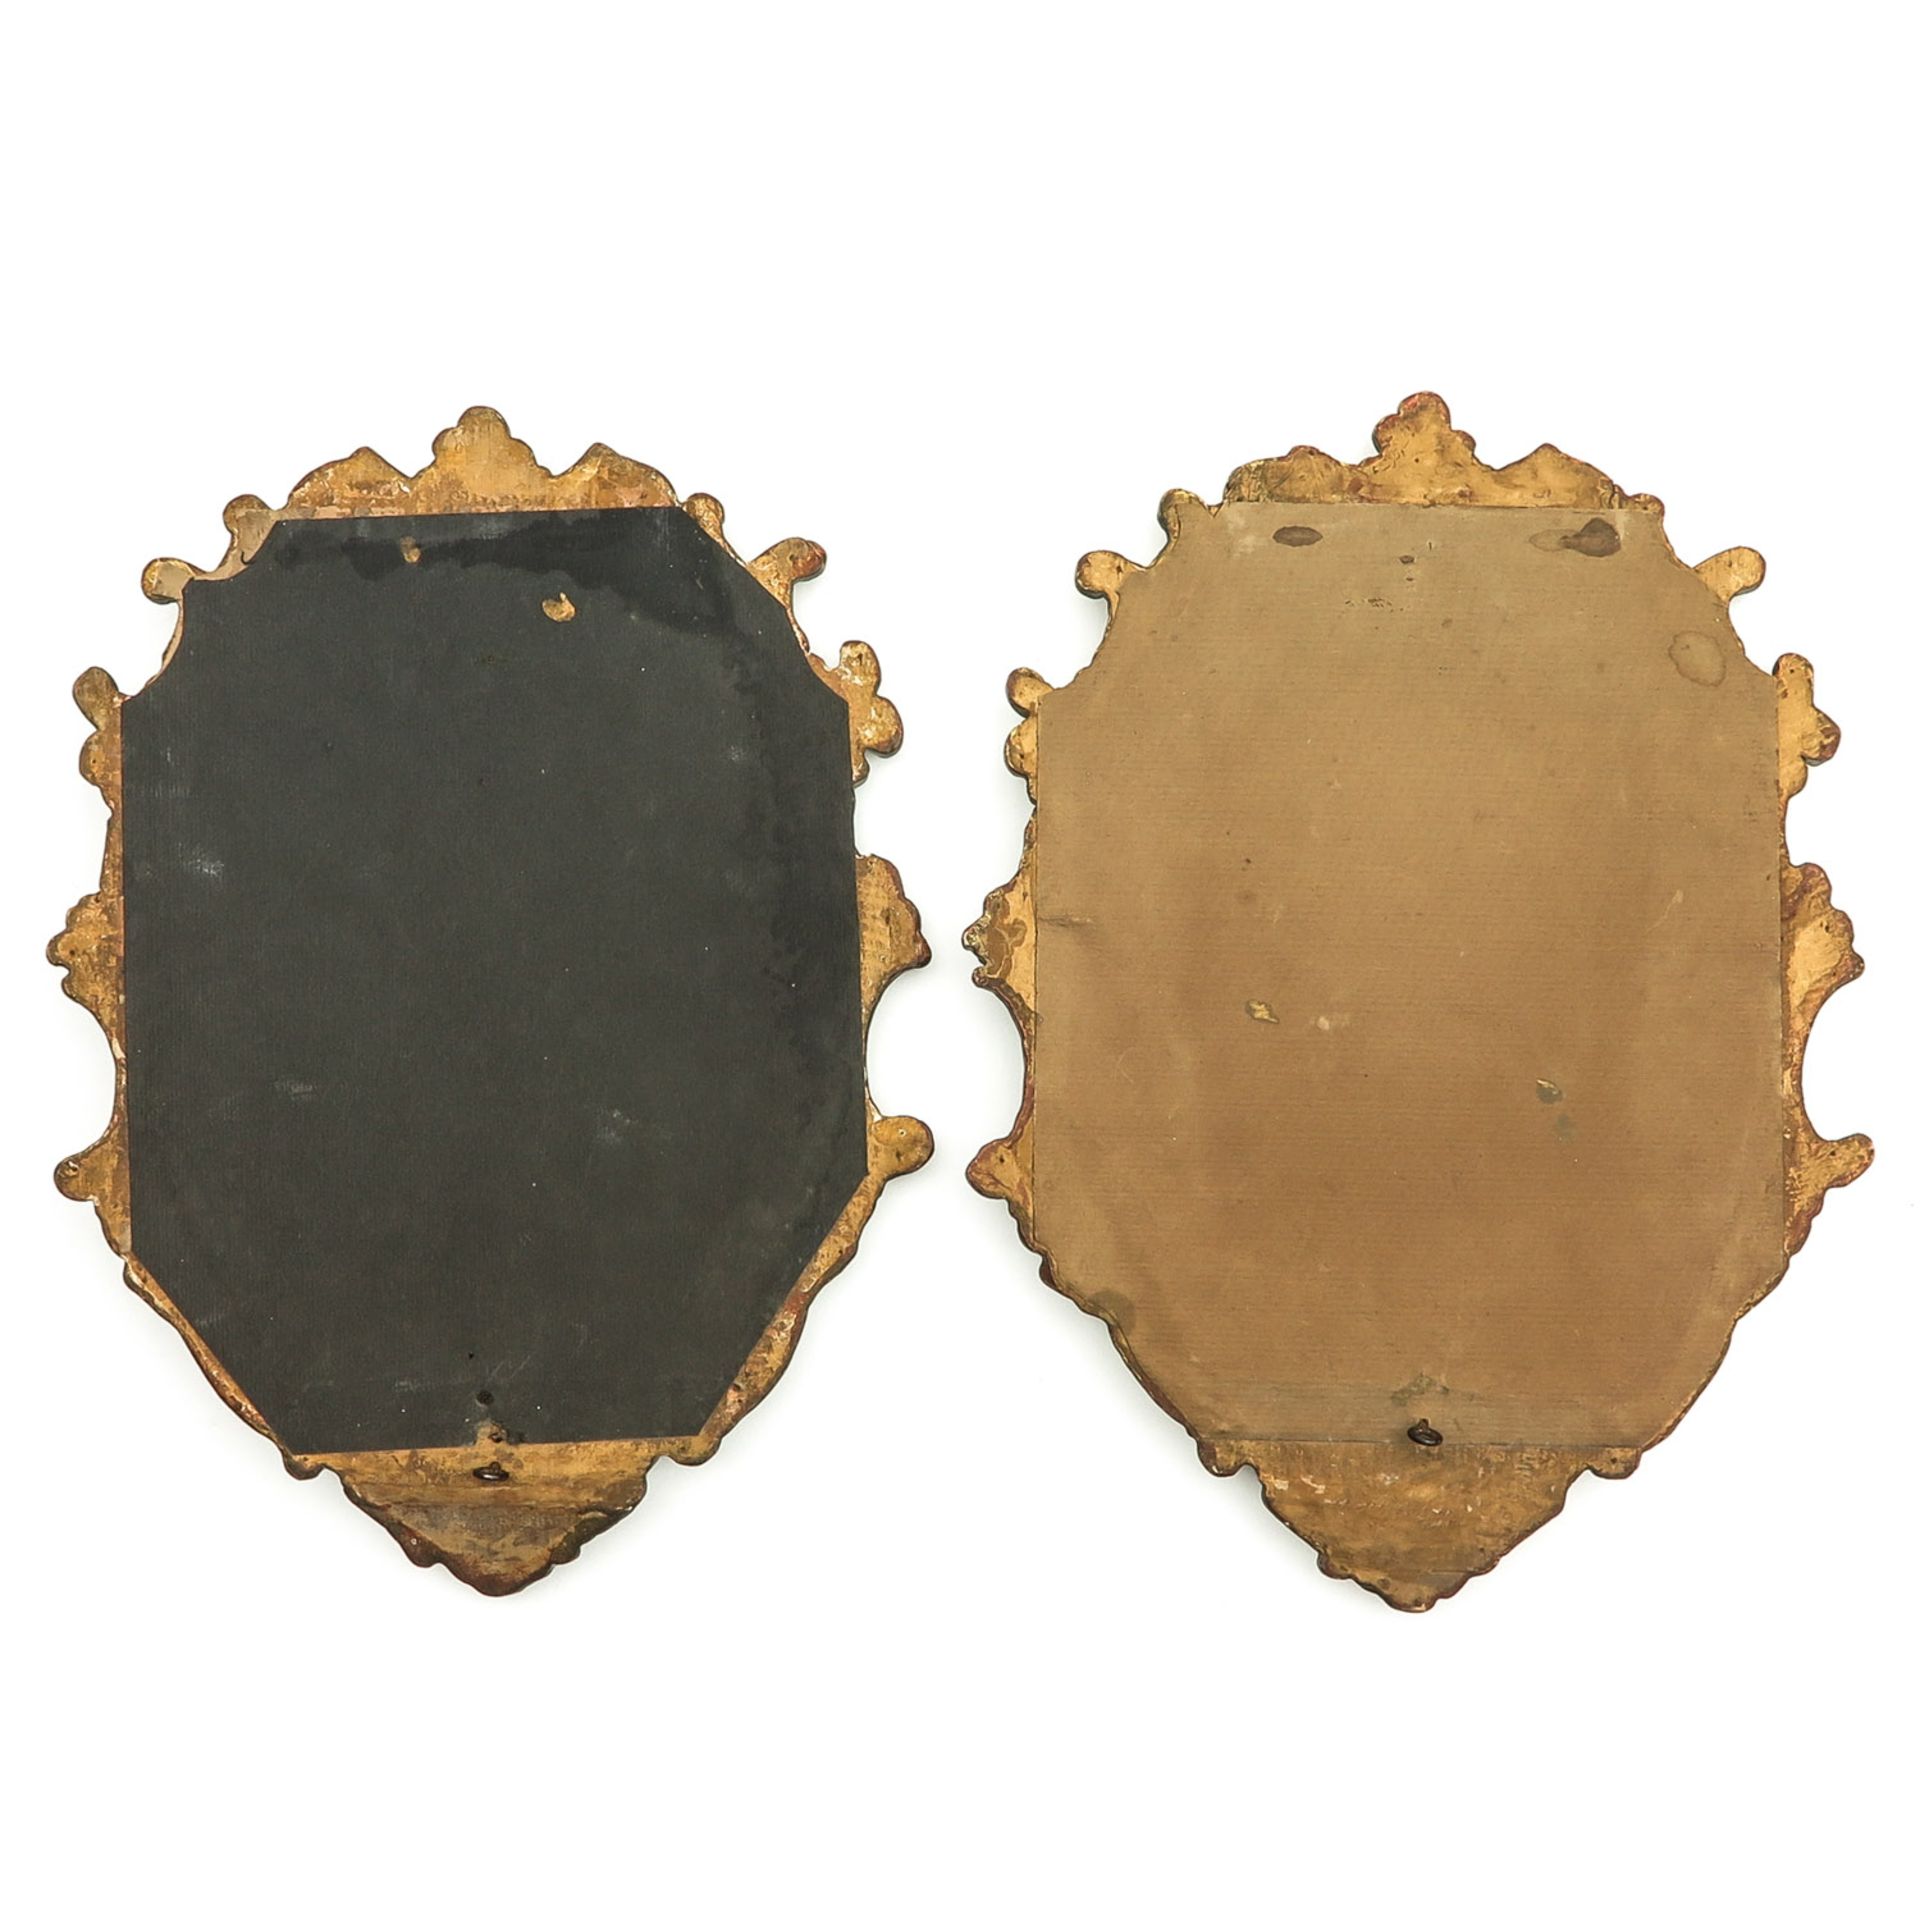 A Pair of 18th - 19th Century Wood Framed Mirrors - Image 2 of 8